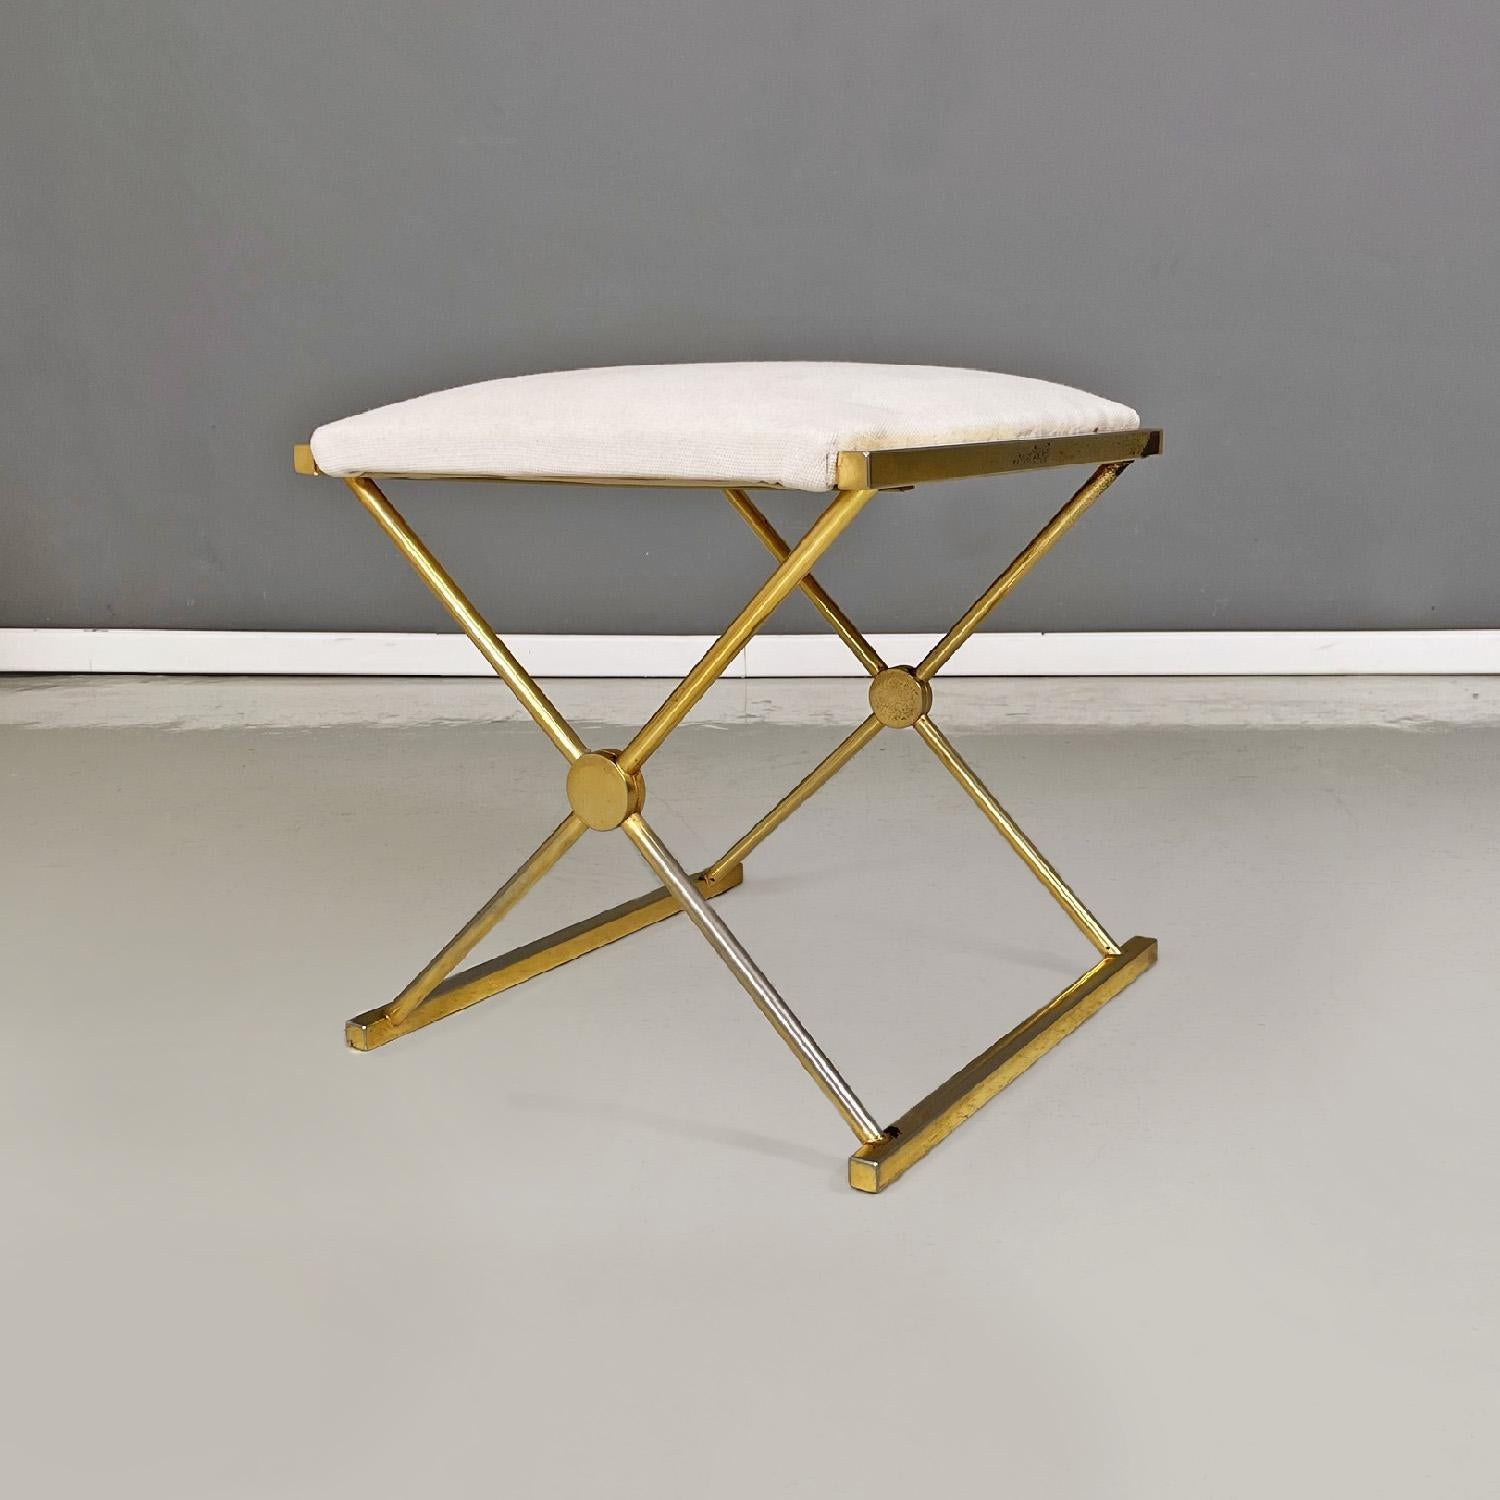 Italian modern Stools in golden metal and white fabric, 1980s
Set of two stools with padded rectangular seat covered in white fabric. The structure, in metal with a golden finish, crosses on two sides to form the legs and the floor